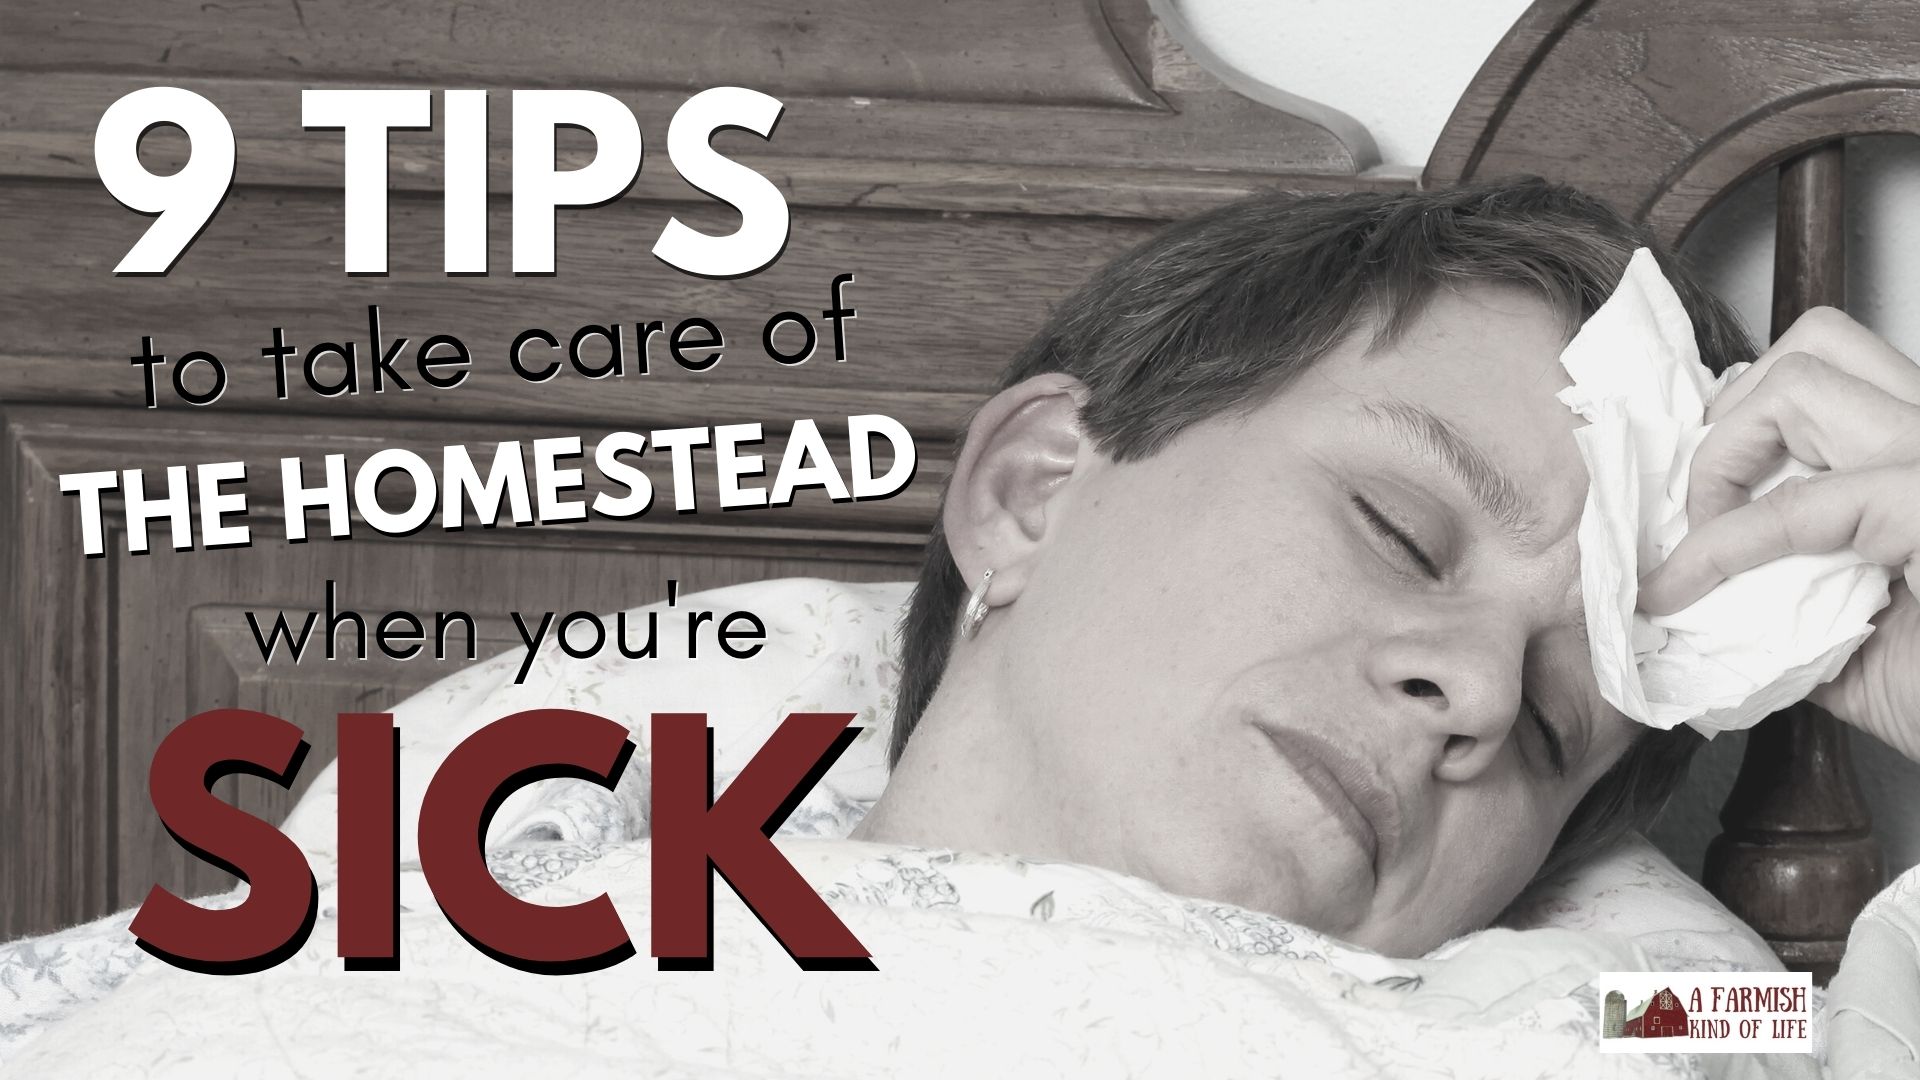 163: 9 Tips for Taking Care of the Homestead When You’re Sick